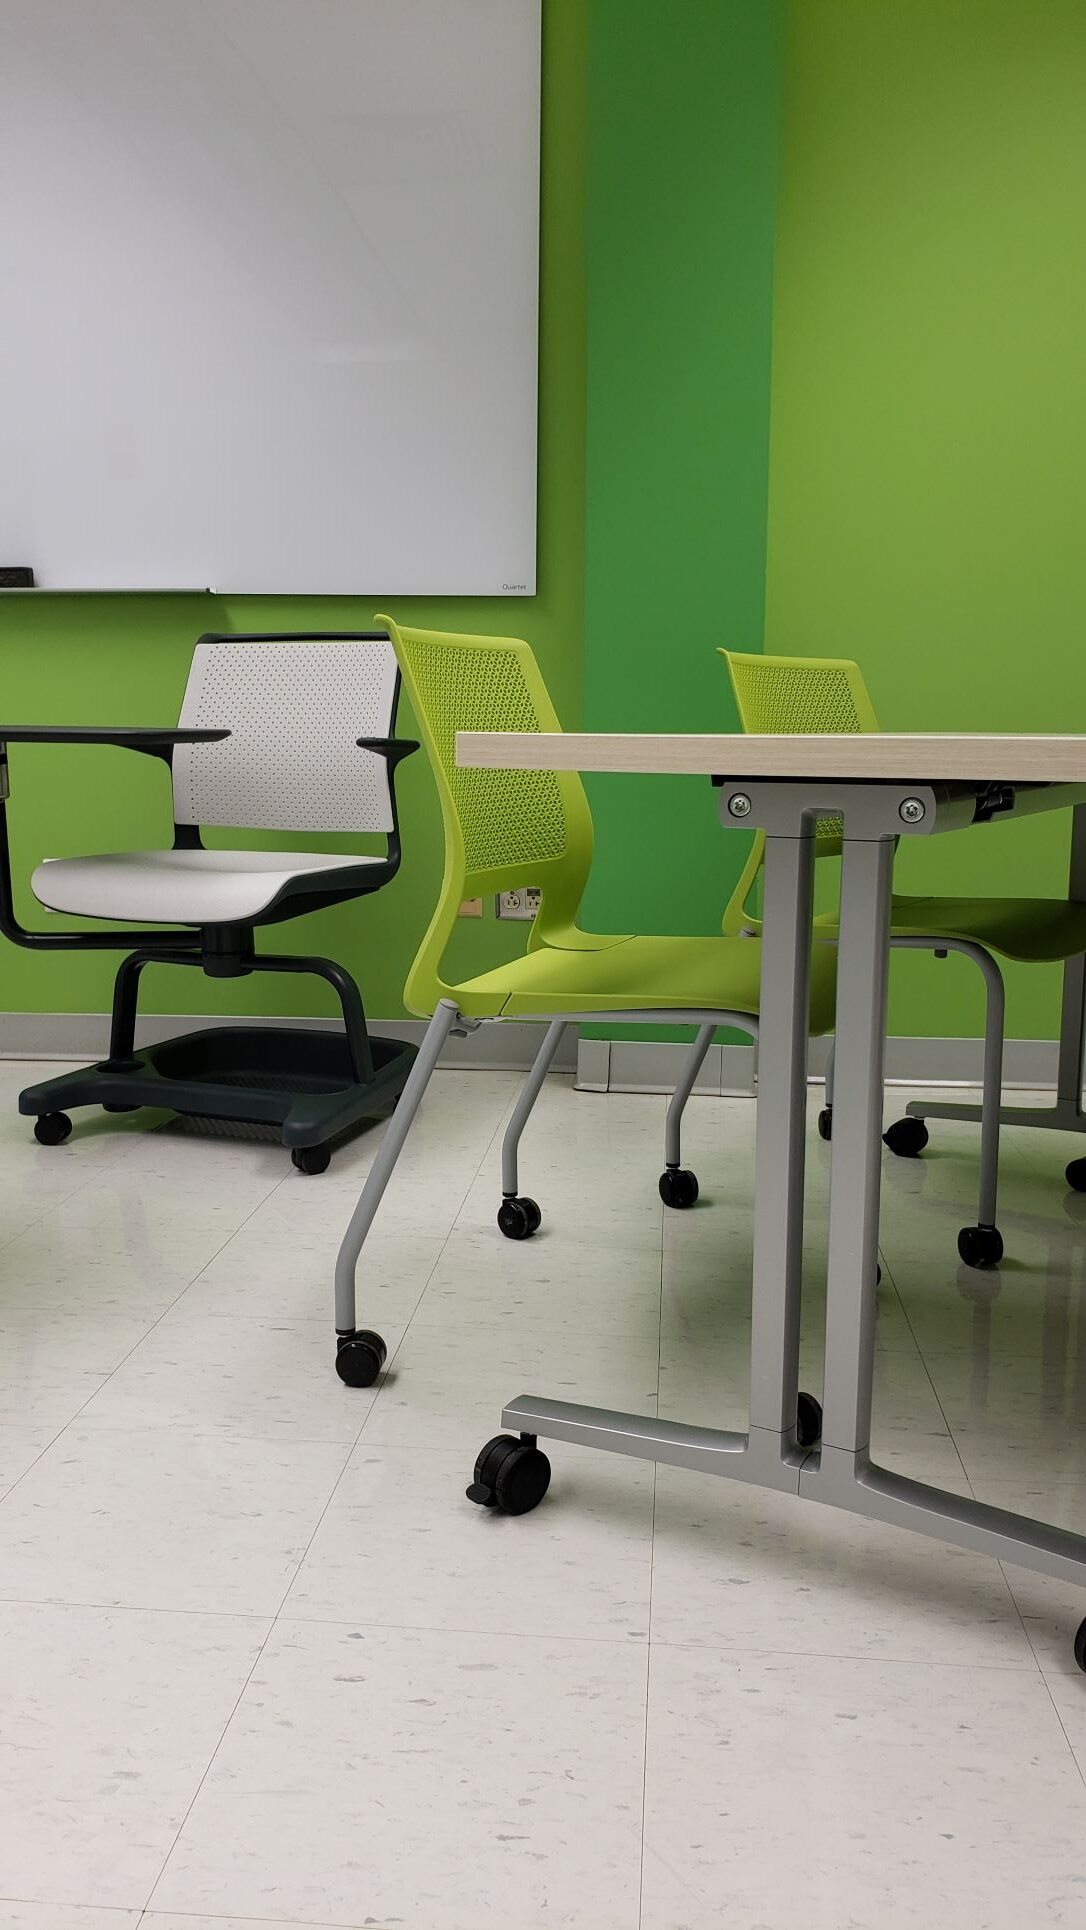 Green chairs with rolling wheels and a grey chair with an attached table in front of a green wall